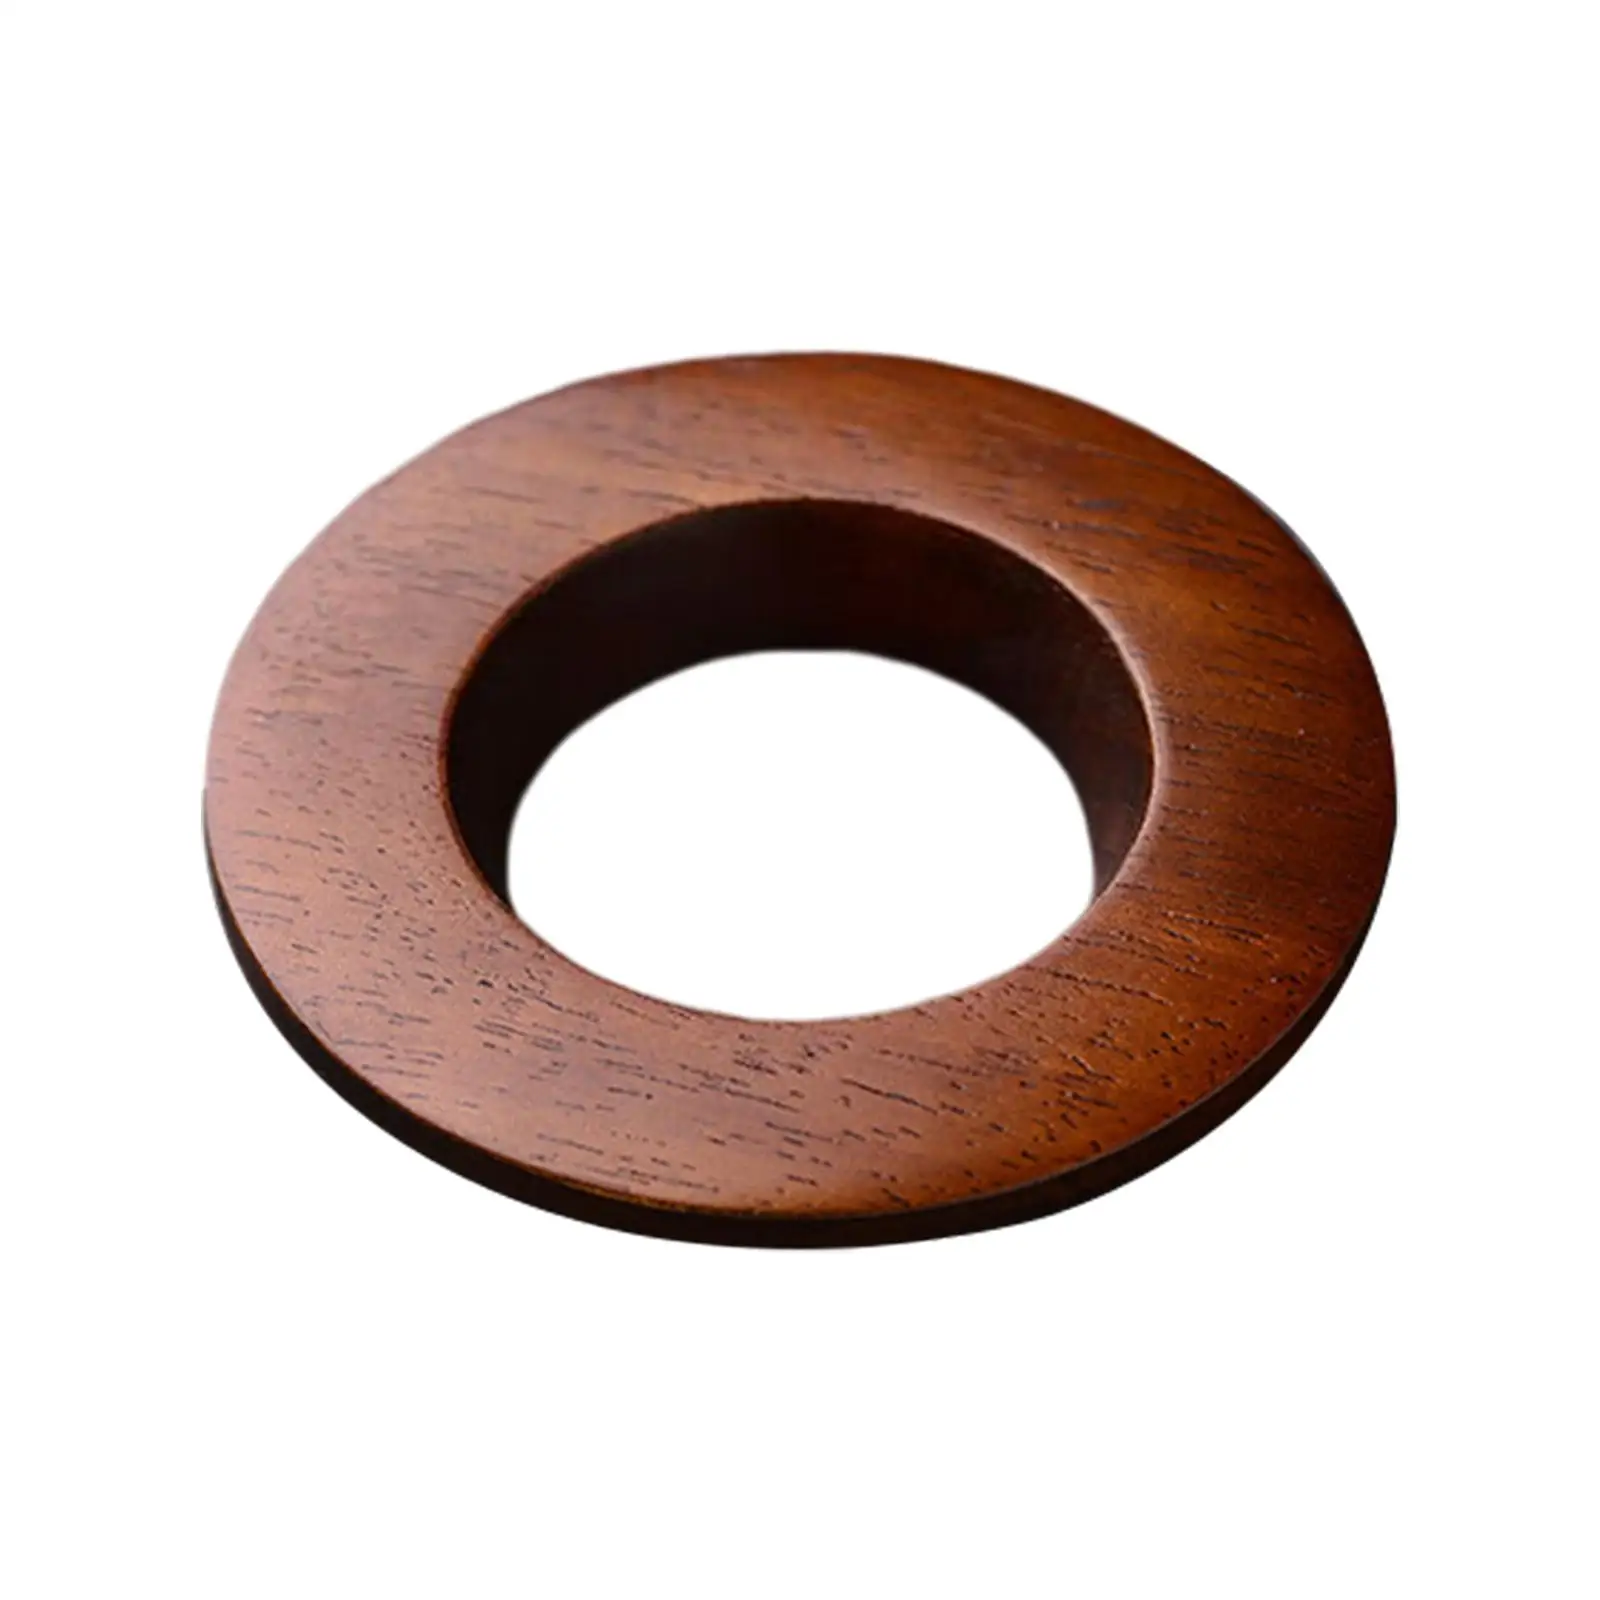 Wood Pour Over Drip Holder Manual coffee Brewing Coffee Accessories Coffee Dripper stand wooden Base for home Travel